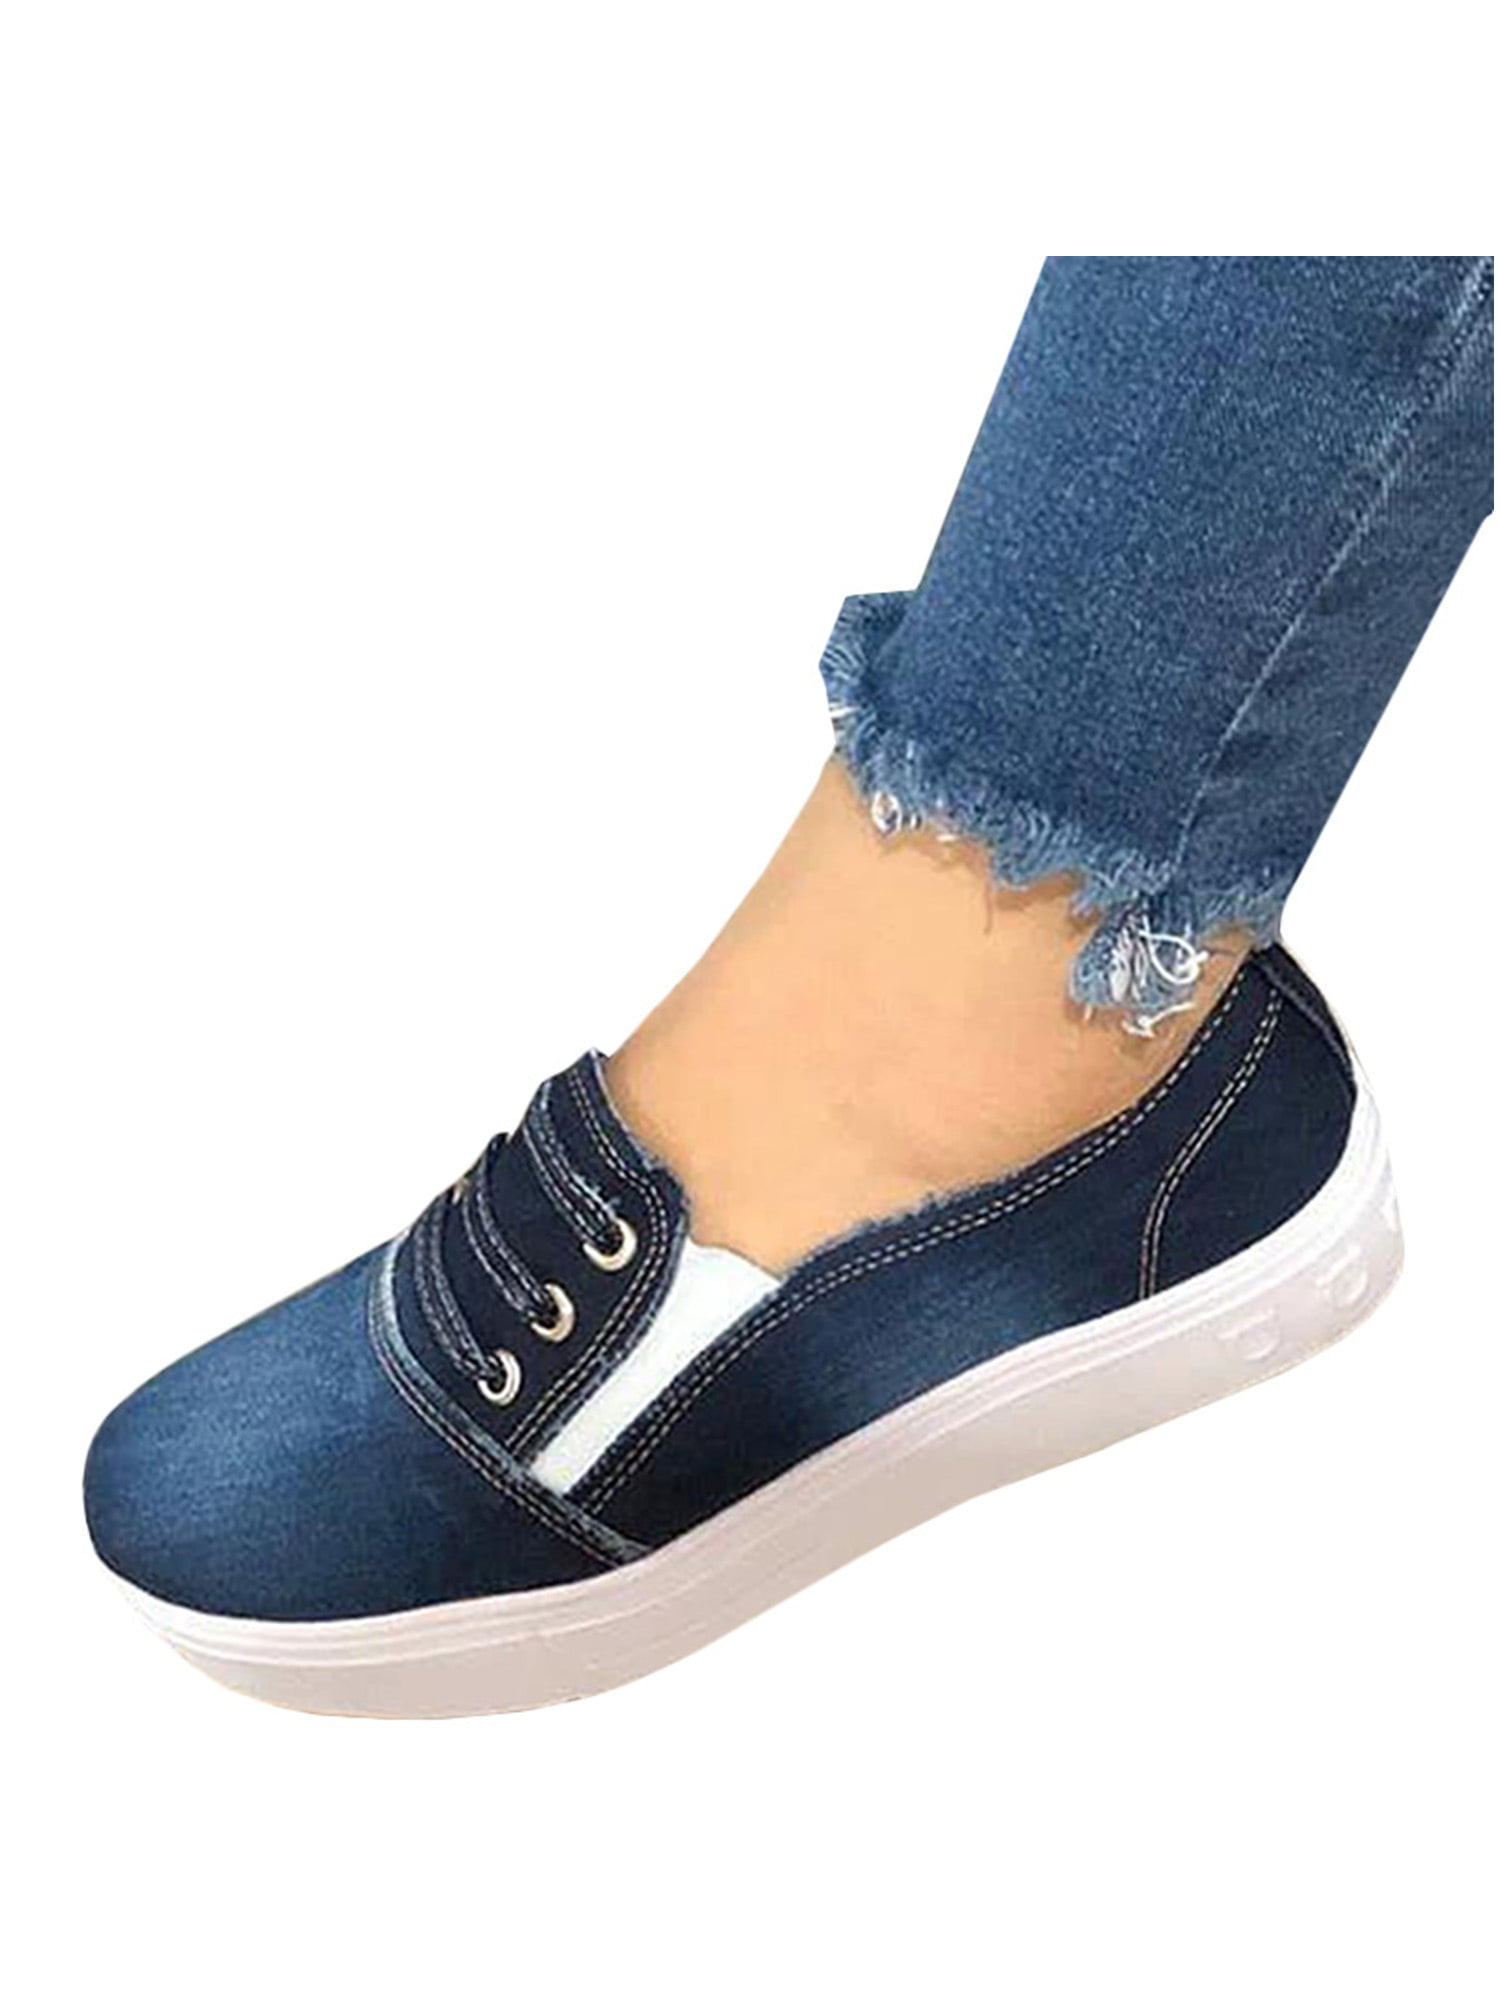 Ladies Slip On Flat Denim Canvas Loafers Casual Trainers Sneakers Comfy ...